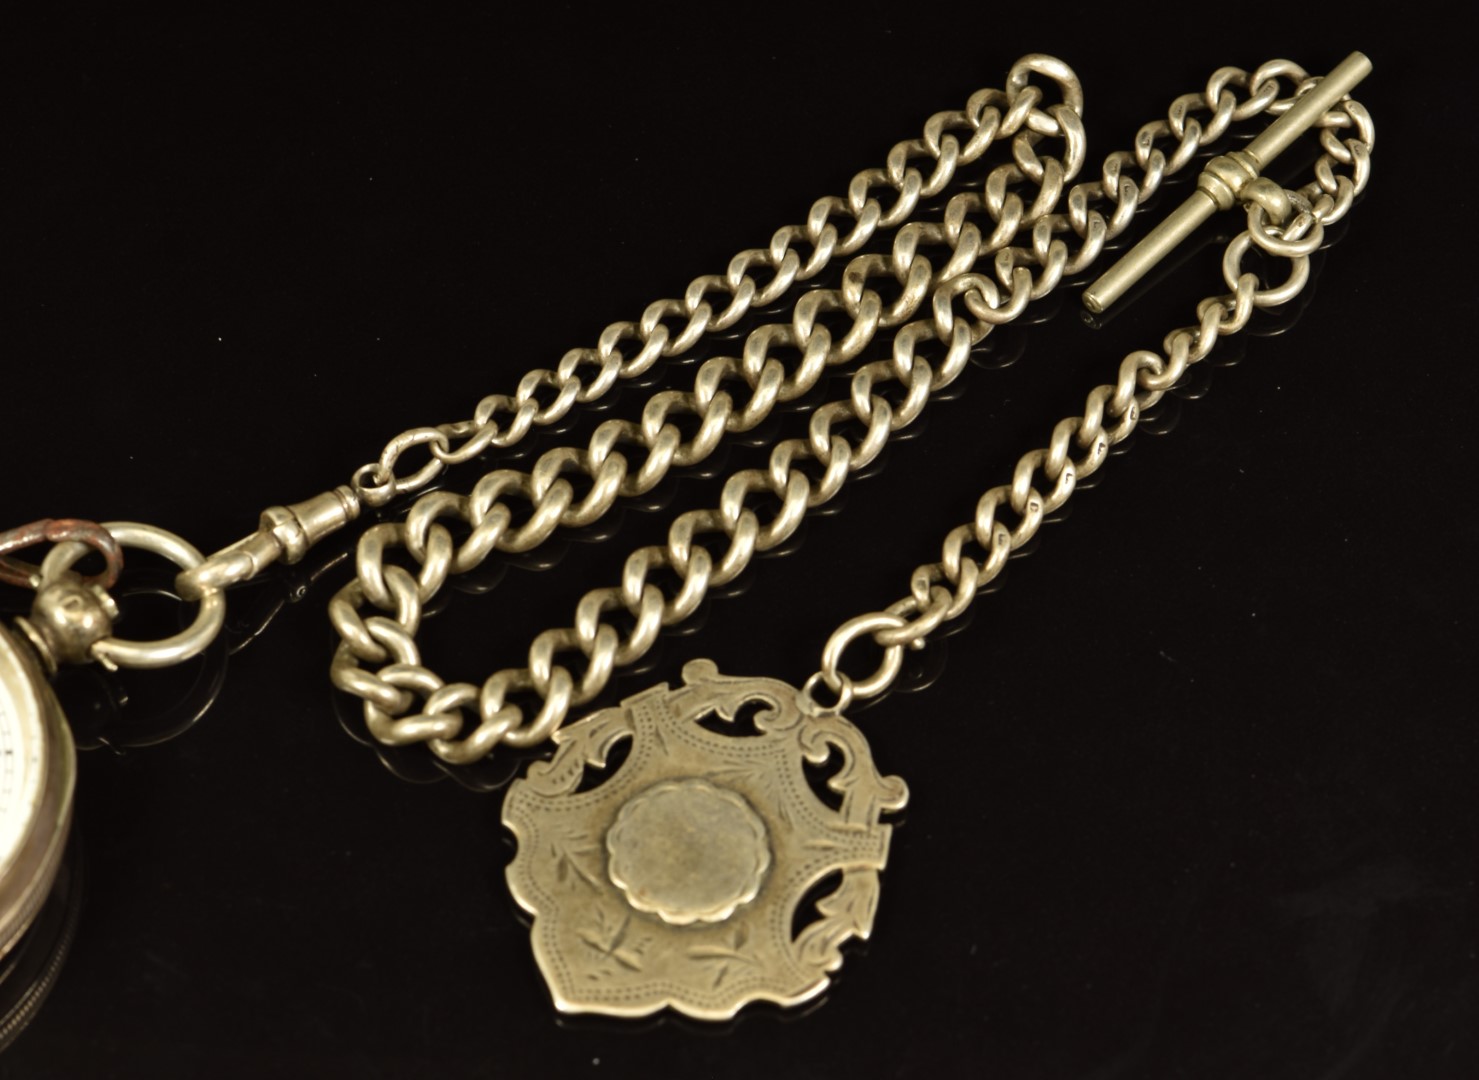 Two open faced pocket watches Paxman's Acme of Tewksbury silver example on silver chain with fob and - Image 3 of 5